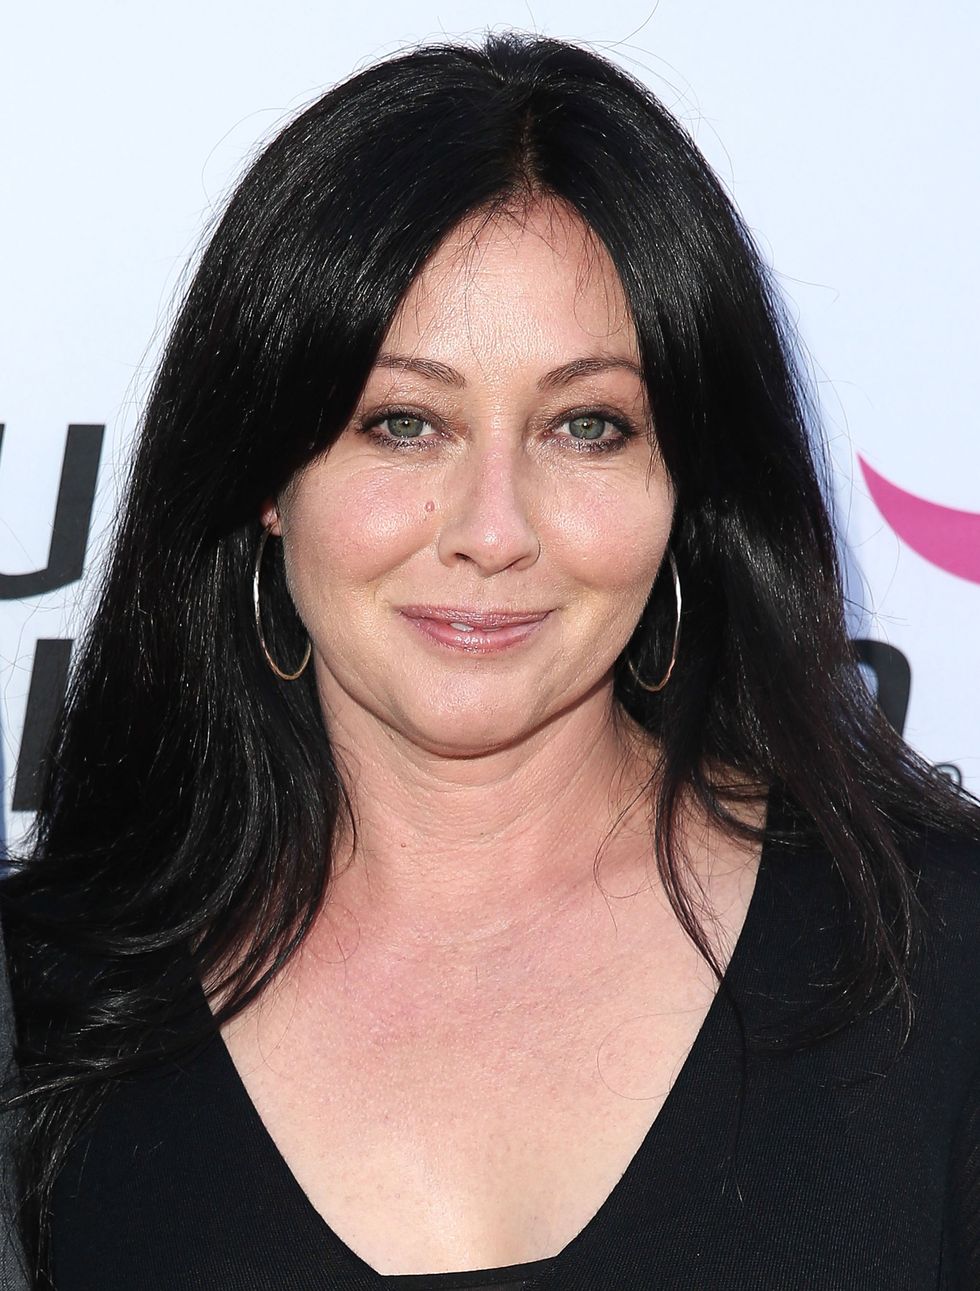 <p>Shannen Doherty played Brandon<span class="redactor-invisible-space" data-verified="redactor" data-redactor-tag="span" data-redactor-class="redactor-invisible-space"></span>'s sister, Brenda. Because of reported&nbsp;on-set conflicts, Shannen was written off the show after four seasons. Since then, the actress has starred&nbsp;in a number of made-for-TV movies and&nbsp;TV show, including&nbsp;<em data-redactor-tag="em" data-verified="redactor">Charmed</em>, which was produced by <em data-redactor-tag="em">Beverly Hills, 90210</em><span class="redactor-invisible-space" data-redactor-tag="span" data-redactor-class="redactor-invisible-space" data-verified="redactor"><em data-redactor-tag="em"></em></span><span class="redactor-invisible-space" data-verified="redactor" data-redactor-tag="span" data-redactor-class="redactor-invisible-space"></span> mastermind Aaron Spelling. Her run on the hit show ended after three seasons, when her character, Prue,&nbsp;was killed off.&nbsp;&nbsp;In 2015, Shannen revealed she had been <a href="http://www.womansday.com/search/shannen%2520doherty" target="_blank" data-tracking-id="recirc-text-link">diagnosed with breast cancer</a>. She is currently fighting&nbsp;the disease with grueling rounds of chemotherapy<span class="redactor-invisible-space" data-verified="redactor" data-redactor-tag="span" data-redactor-class="redactor-invisible-space">, and documenting her battle on social media.</span></p>